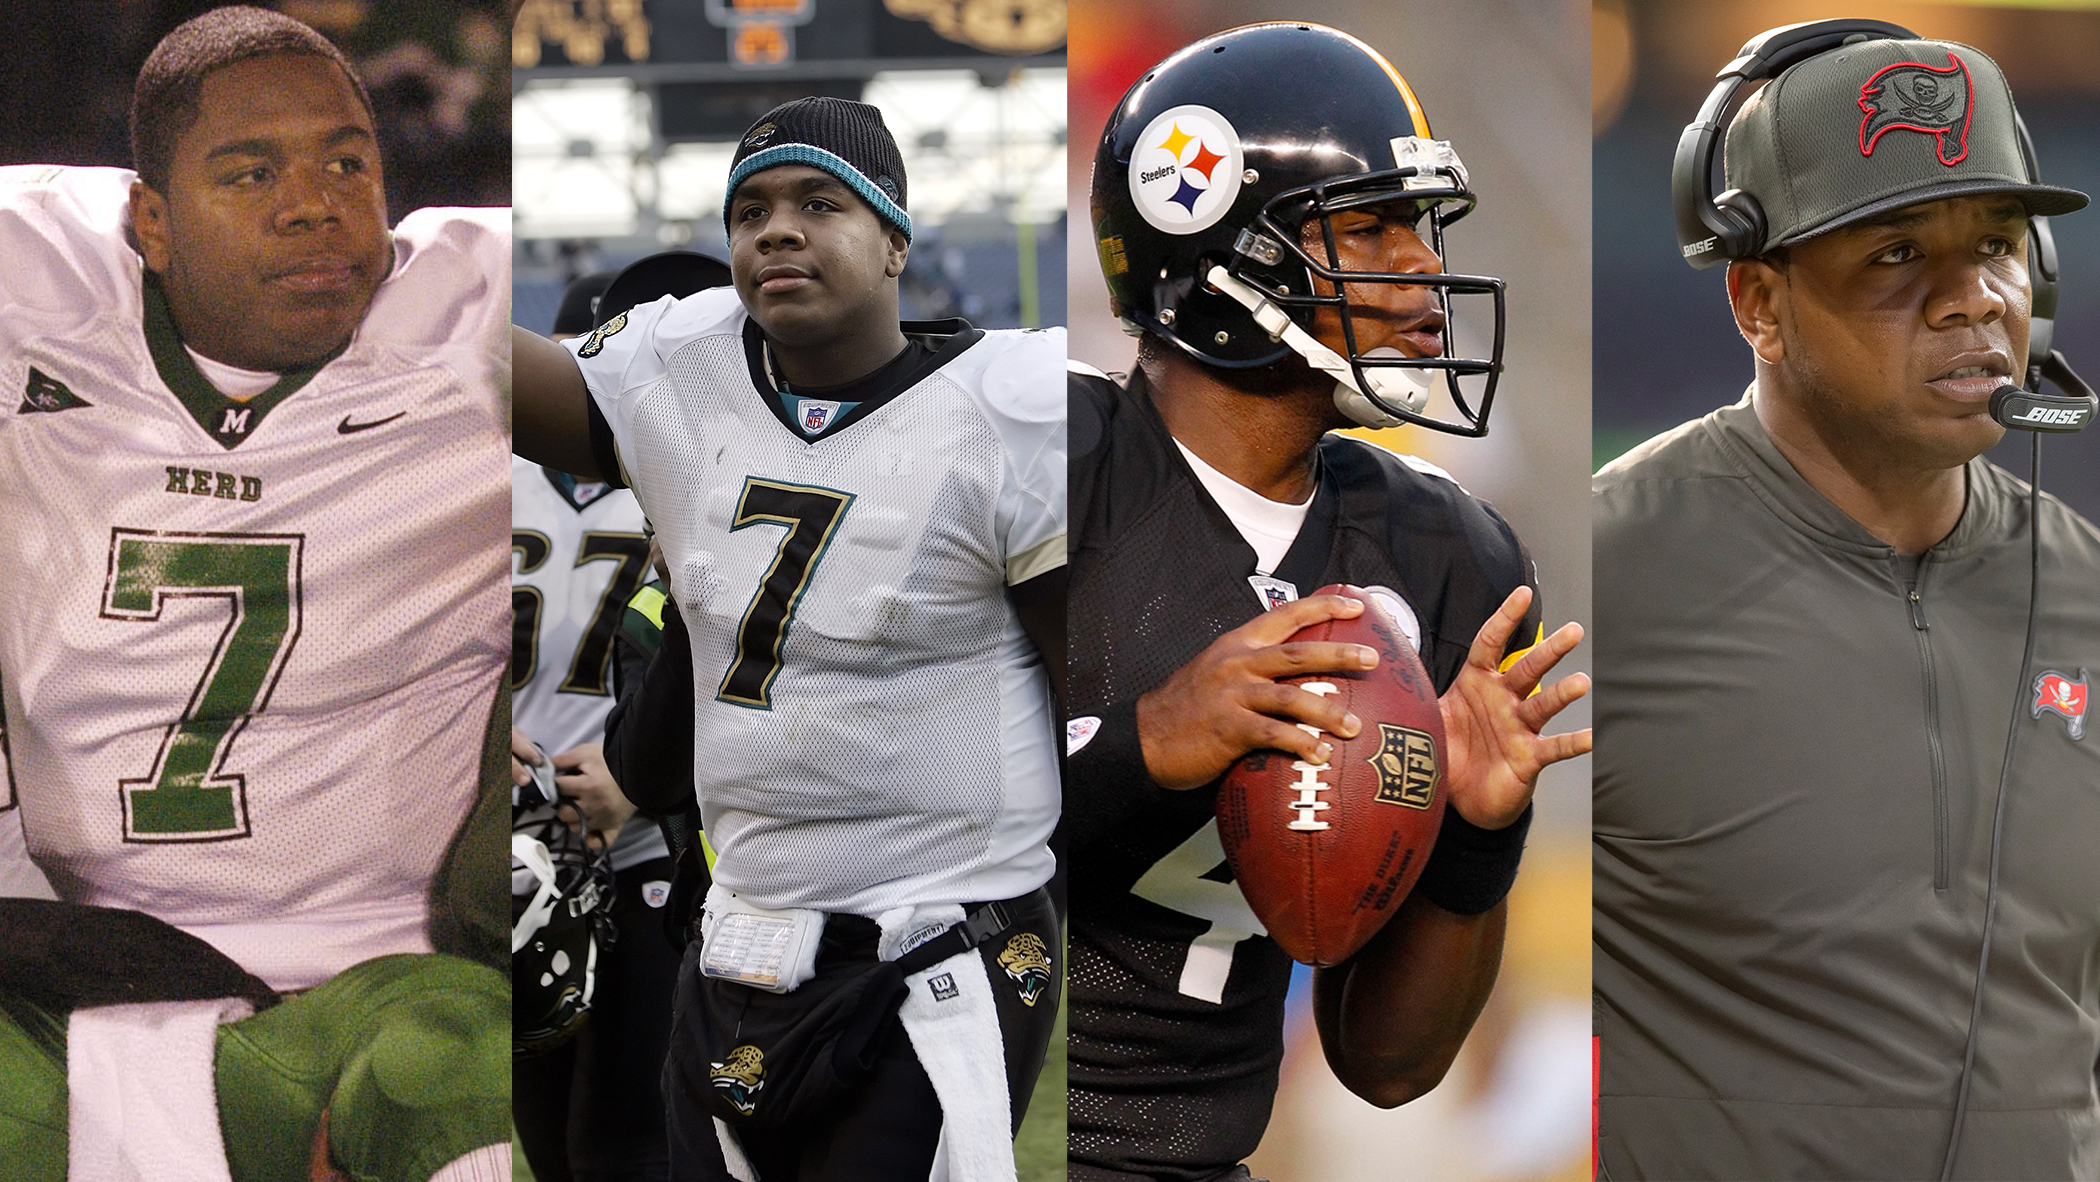 Timeline: The moments that made Byron Leftwich